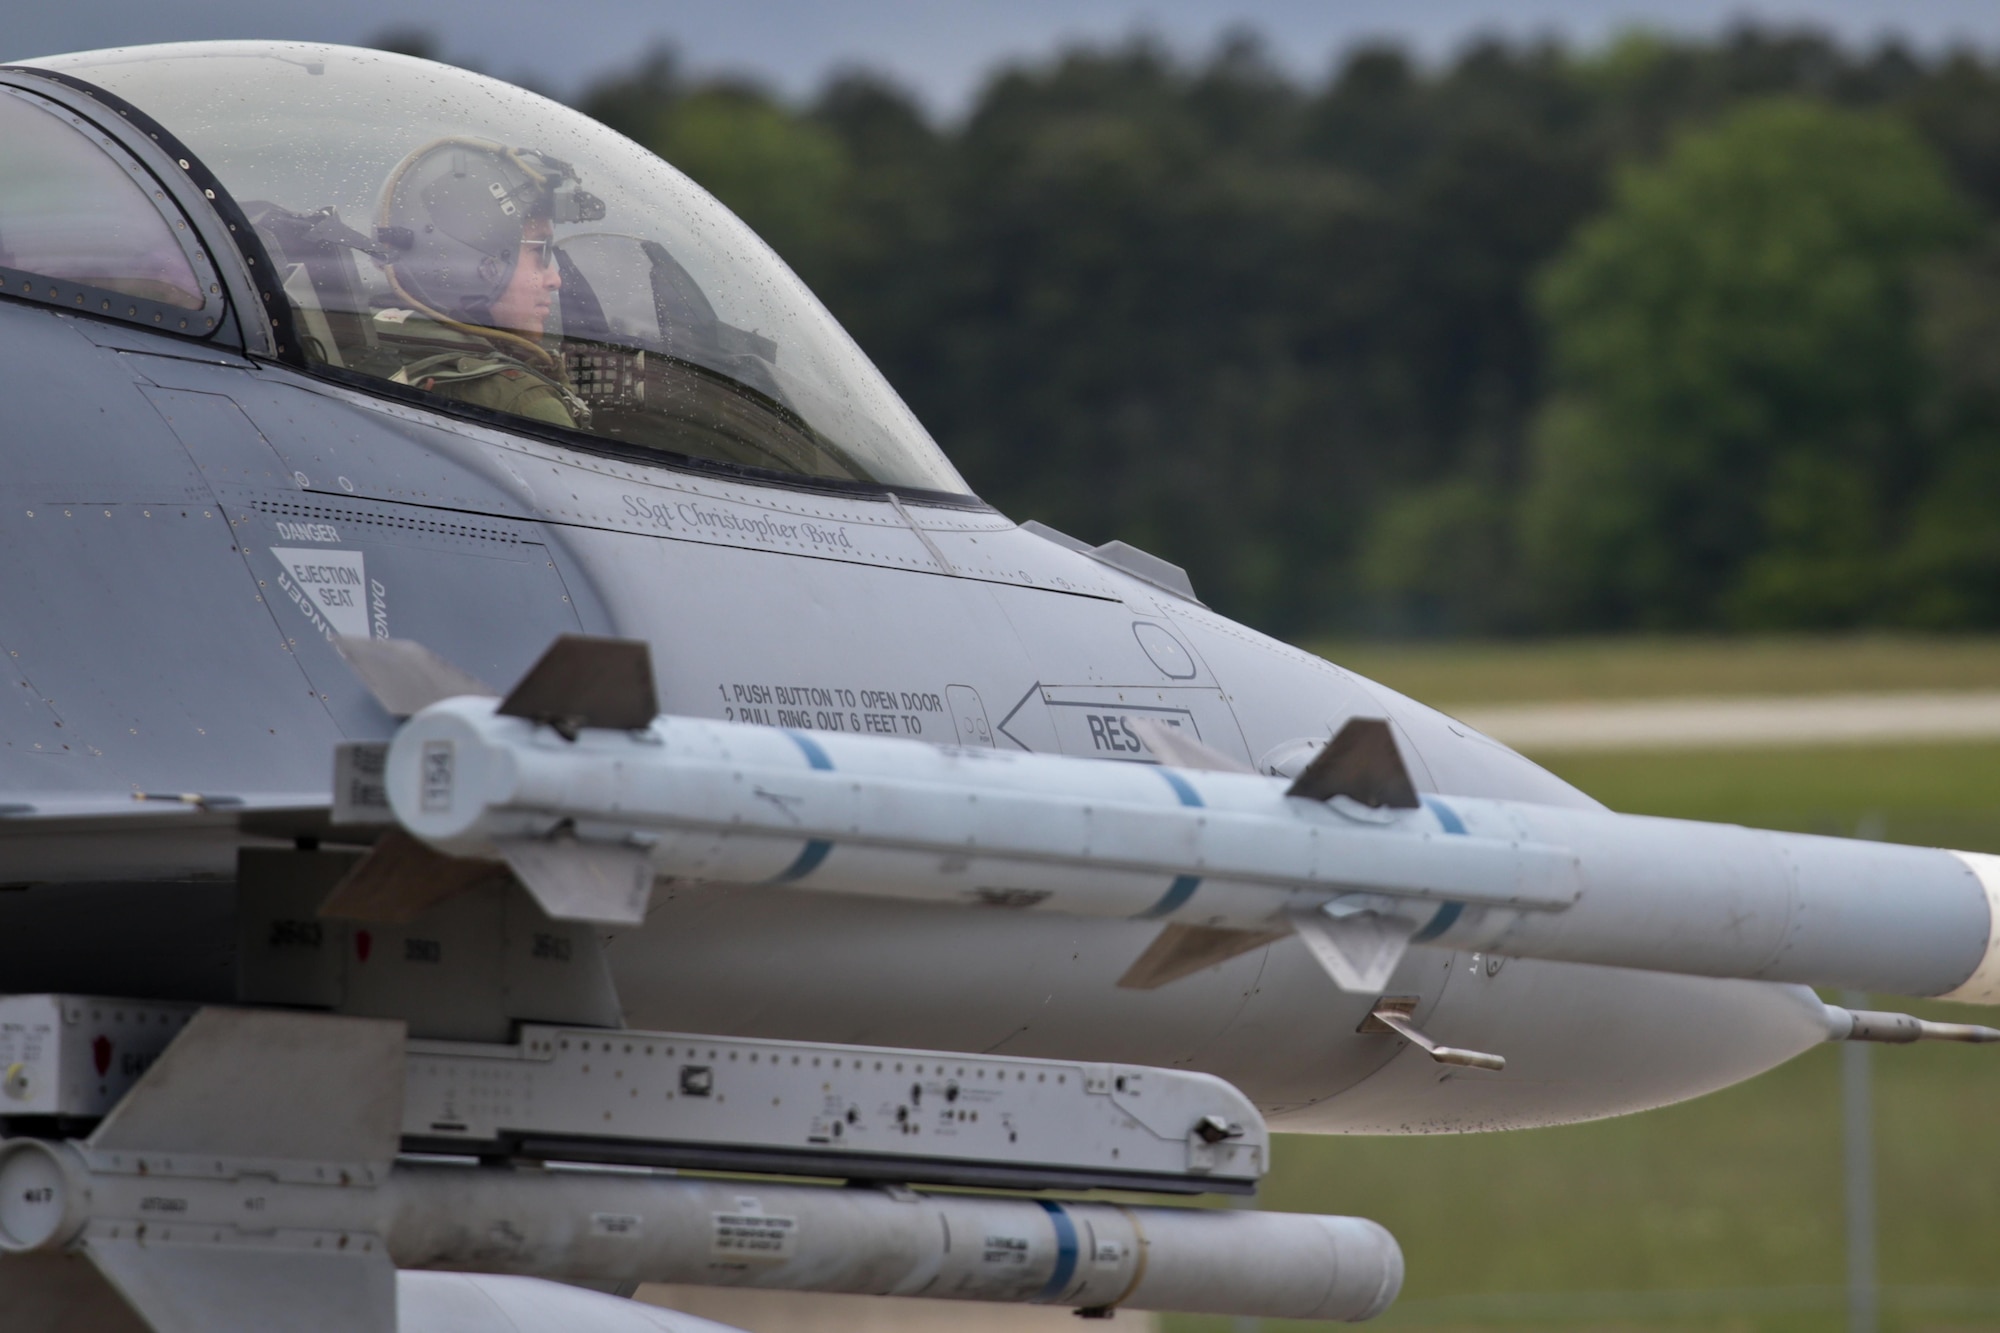 A New Jersey National Guard F-16C prepares for takeoff during a three-day Aeropsace Control Alert CrossTell live-fly training exercise at Atlantic City Air National Guard Base, N.J., May 24, 2017. Representatives from the Air National Guard fighter wings, Civil Air Patrol, and U.S. Coast Guard rotary-wing air intercept units will conduct daily sorties from May 23-25 to hone their skills with tactical-level air-intercept procedures. (U.S. Air National Guard photo by Master Sgt. Matt Hecht/Released)